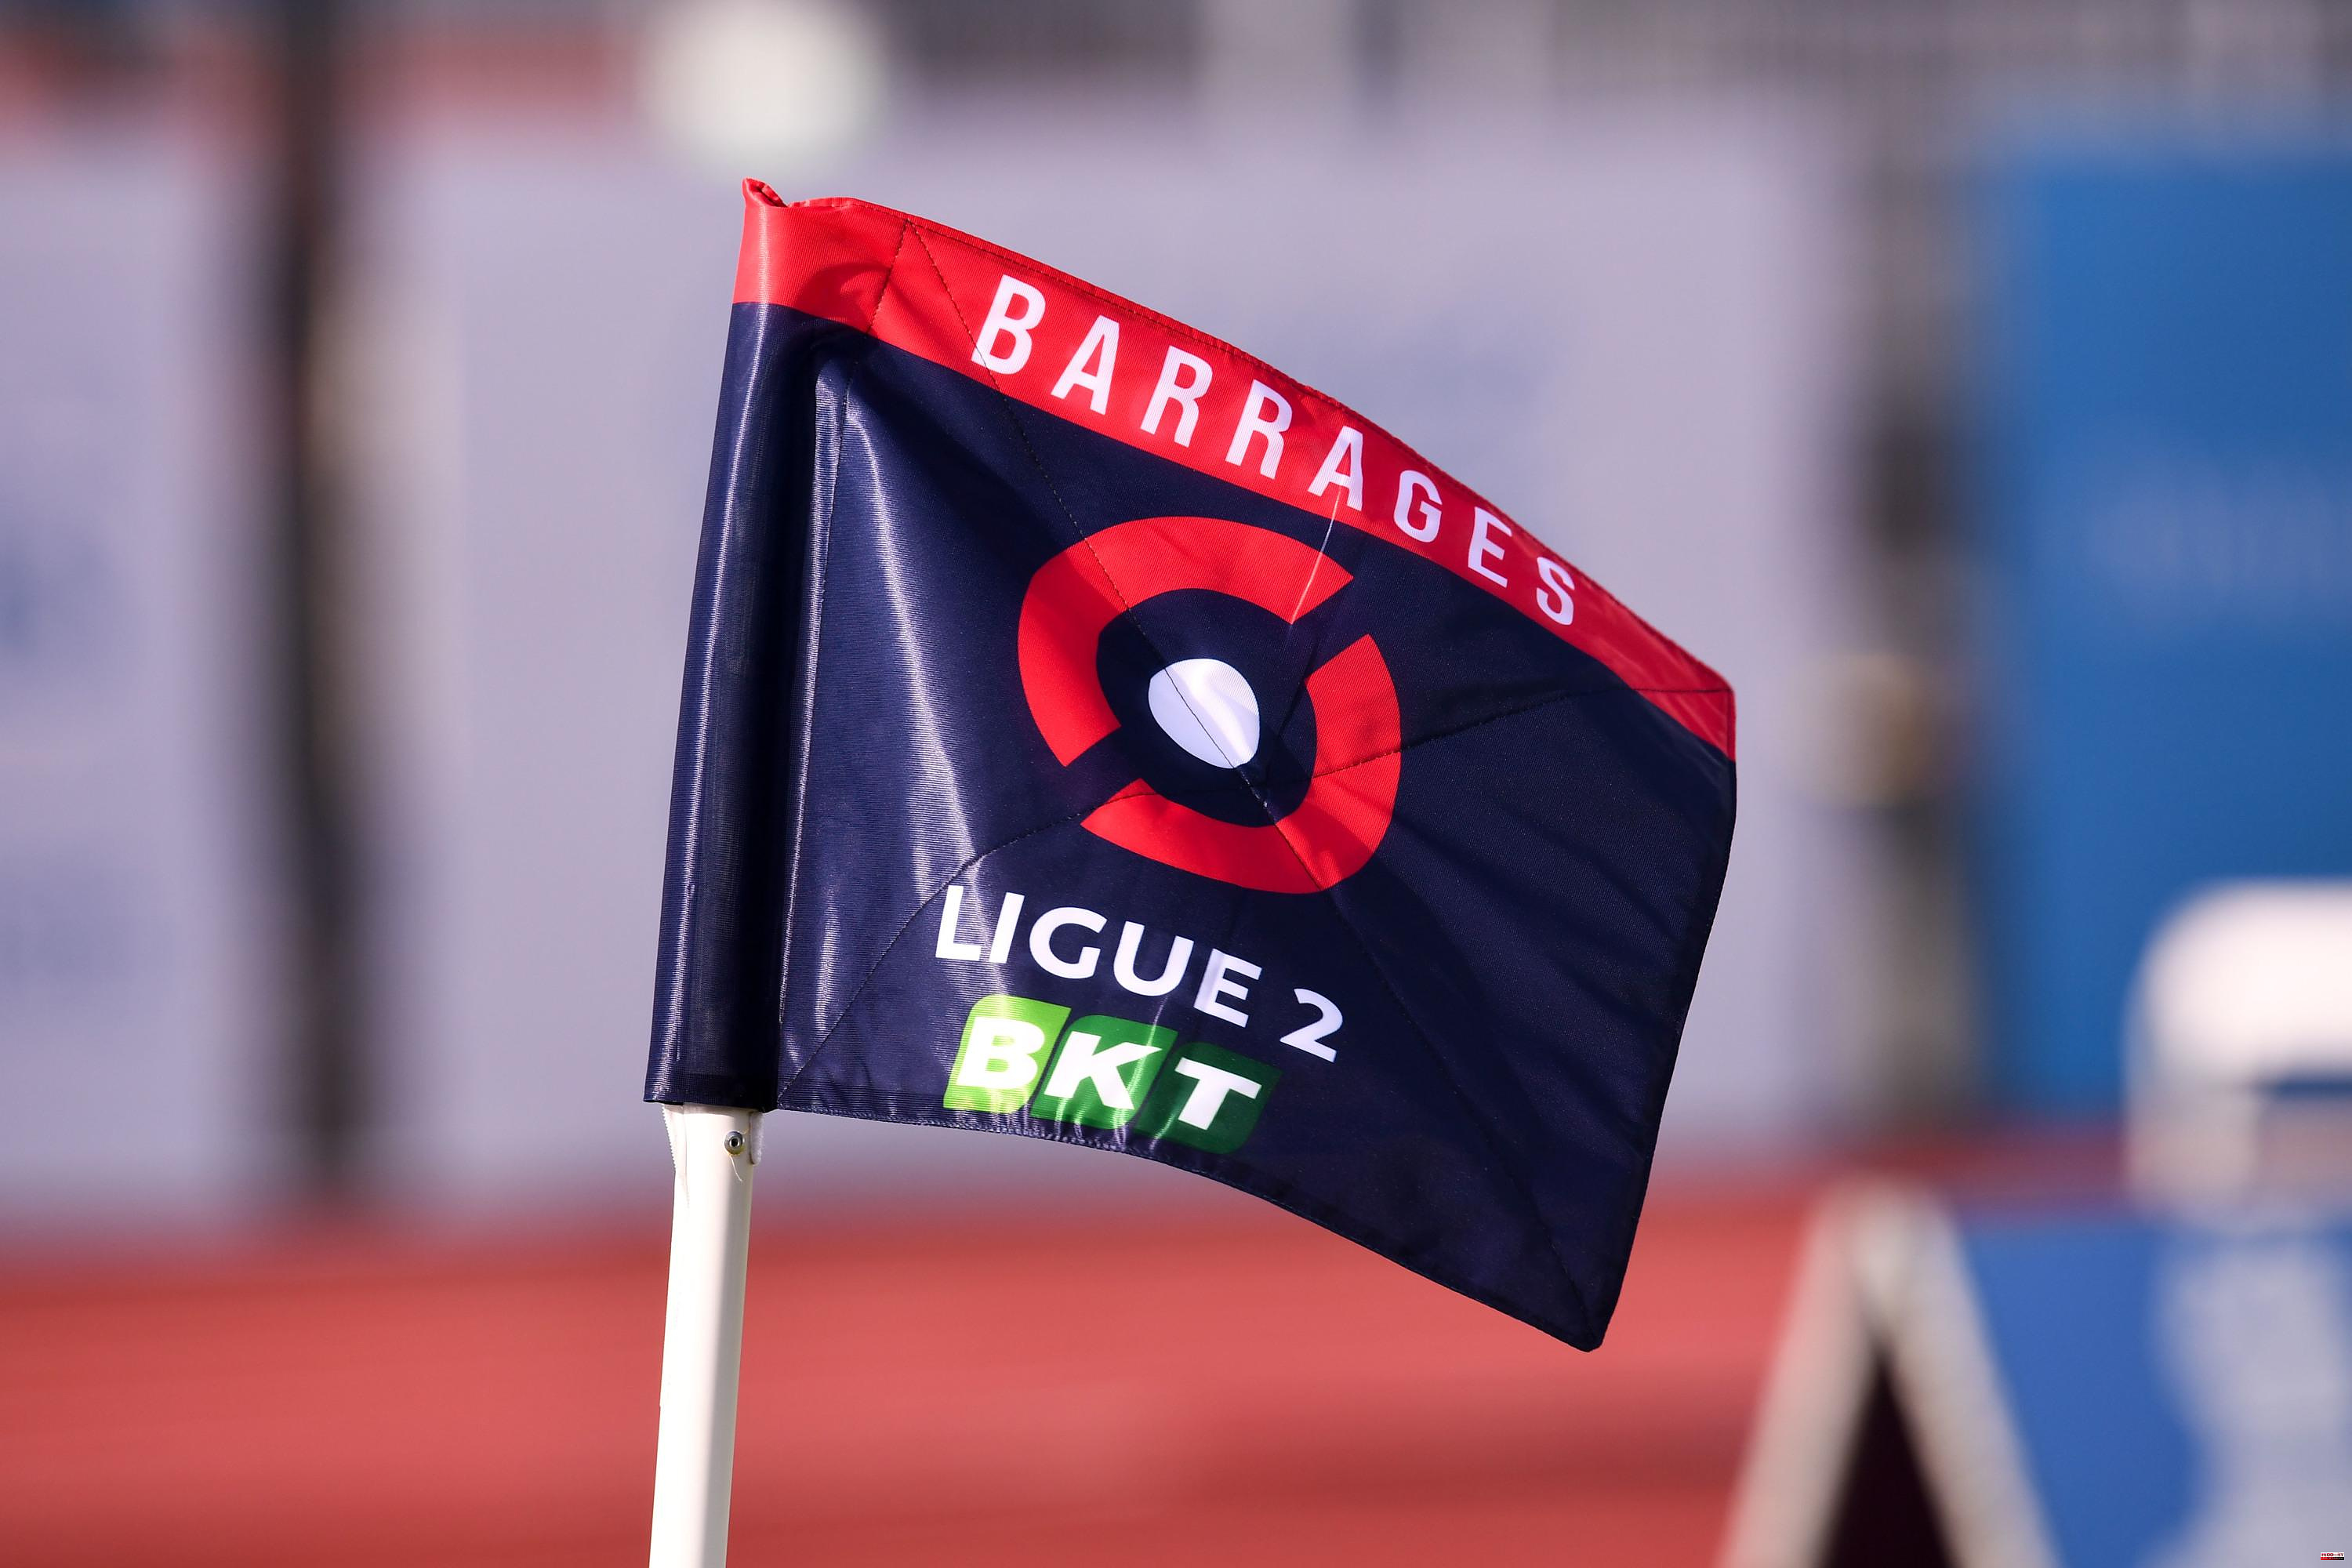 Villefranche Beaujolais plays a historic rise in Ligue 2